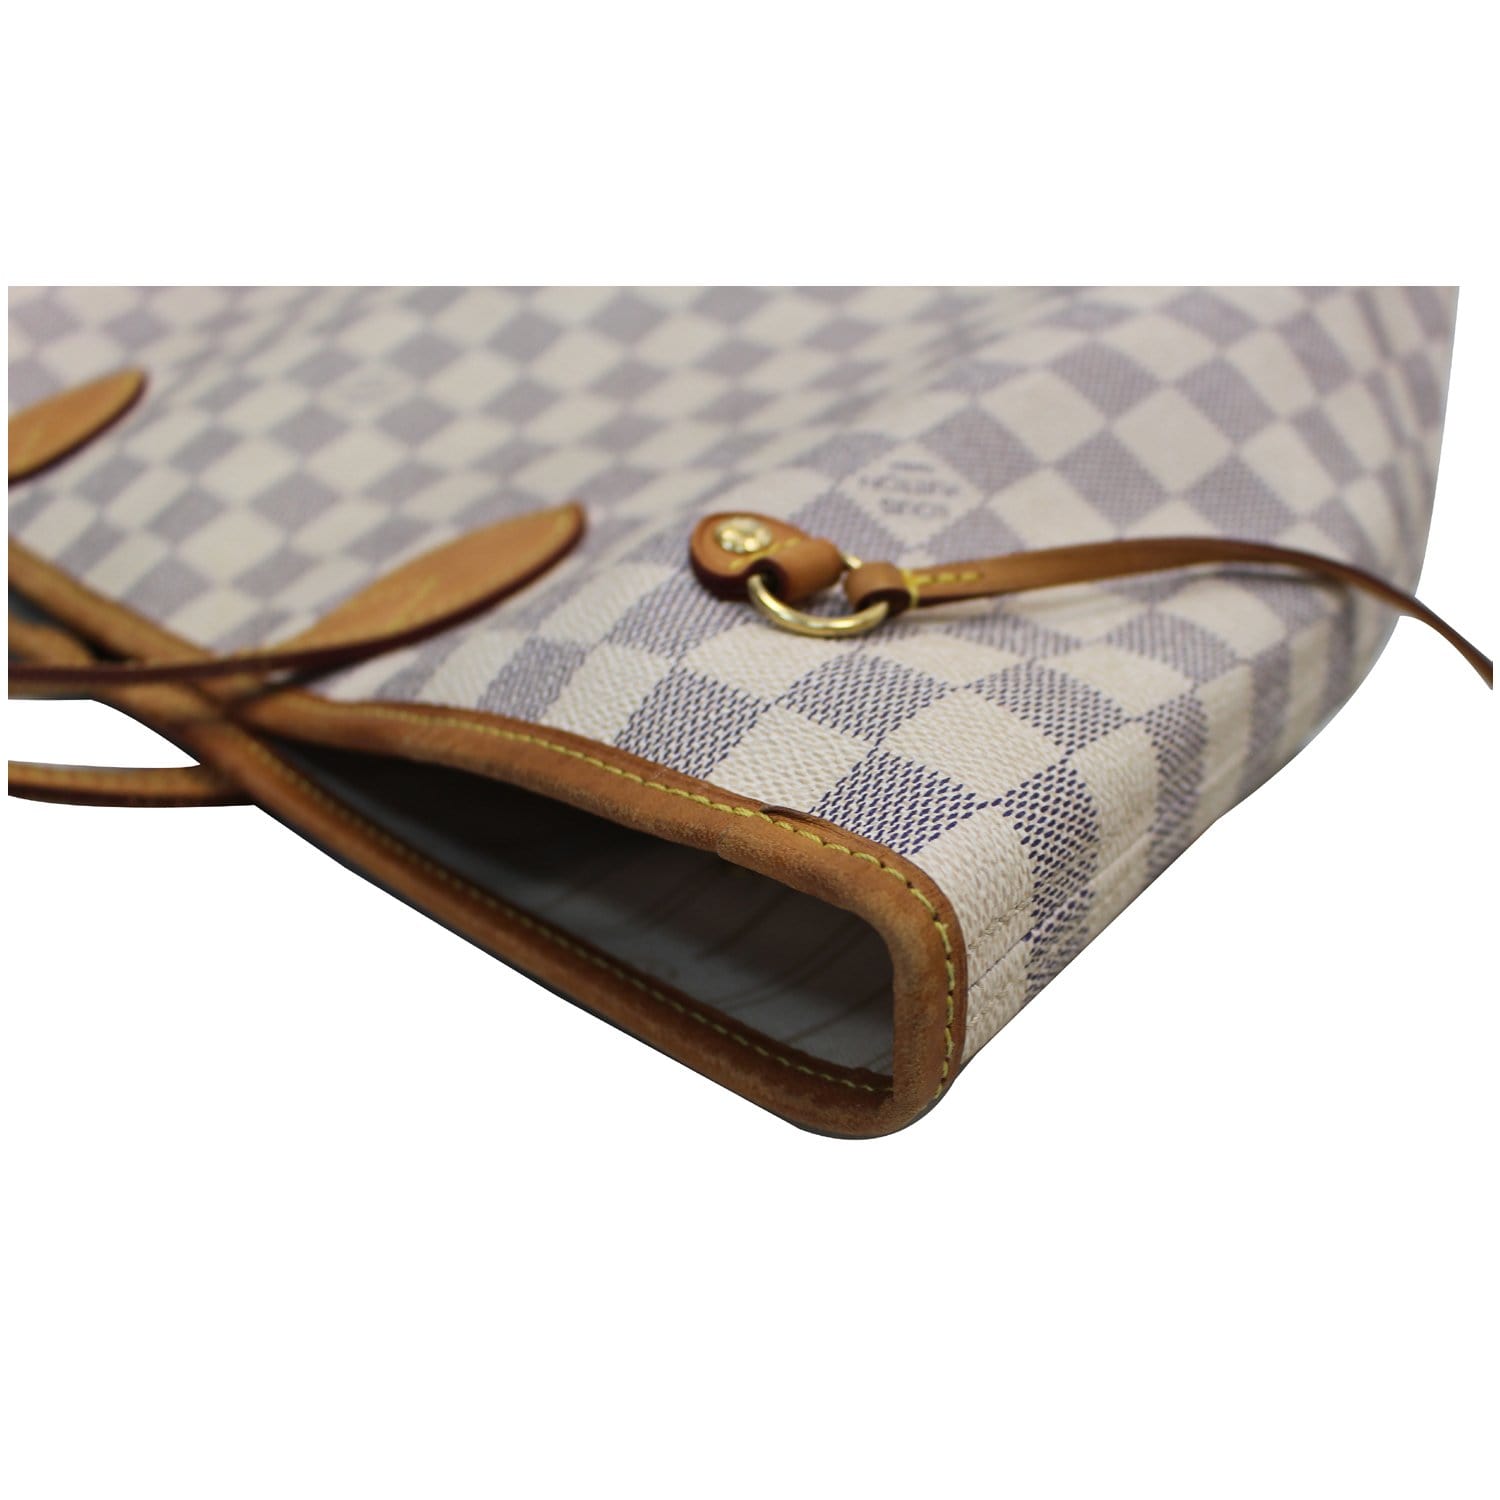 Louis Vuitton Neverfull MM White in Lotus Cotton with Gold-tone - US